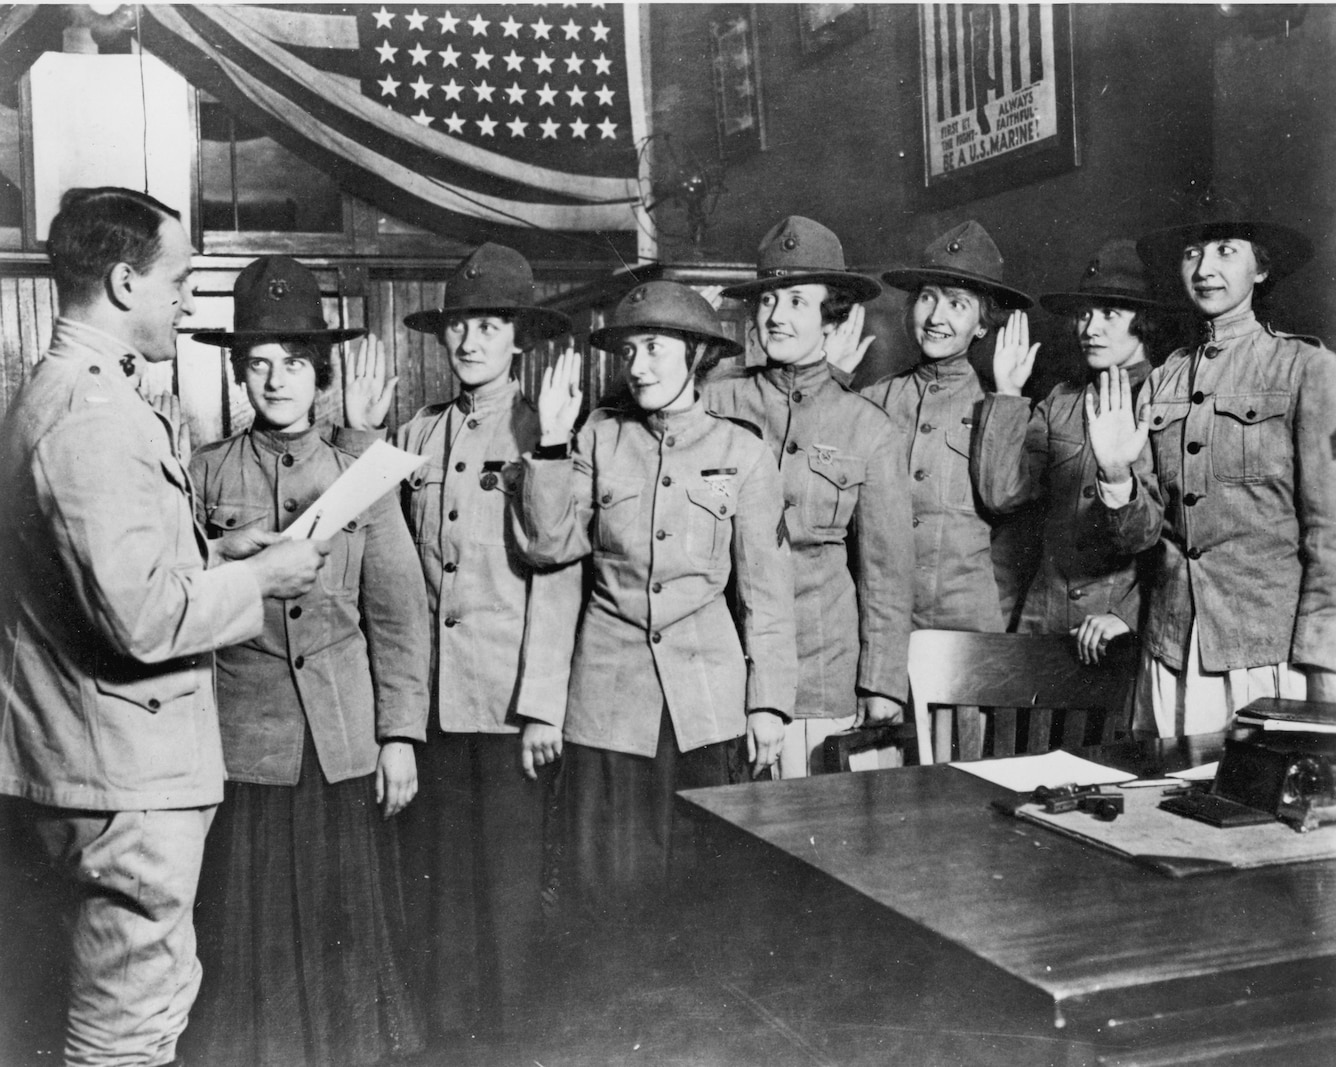 These are the eight women admitted as privates in the United States Marine Corps who are going to Washington as enlisted “stenos” in the office of the Marine Corps Adjutant. With Lieutenant George Kneller, who swore them in, they are from left to right:  Violet Van Wagner, Brooklyn; Marie S. Schleight, Glendale, L.I.; Florence Wiedinger, Jersey City; Isabelle Balfour, Janet Kurgan, Edith Barton, and Helene Constance Dupont, whose husband is a sergeant in France.  Mrs. Dupont and Miss Kurgan are sisters.
DEFENSE DEPT PHOTO (MARINE CORPS) 530552